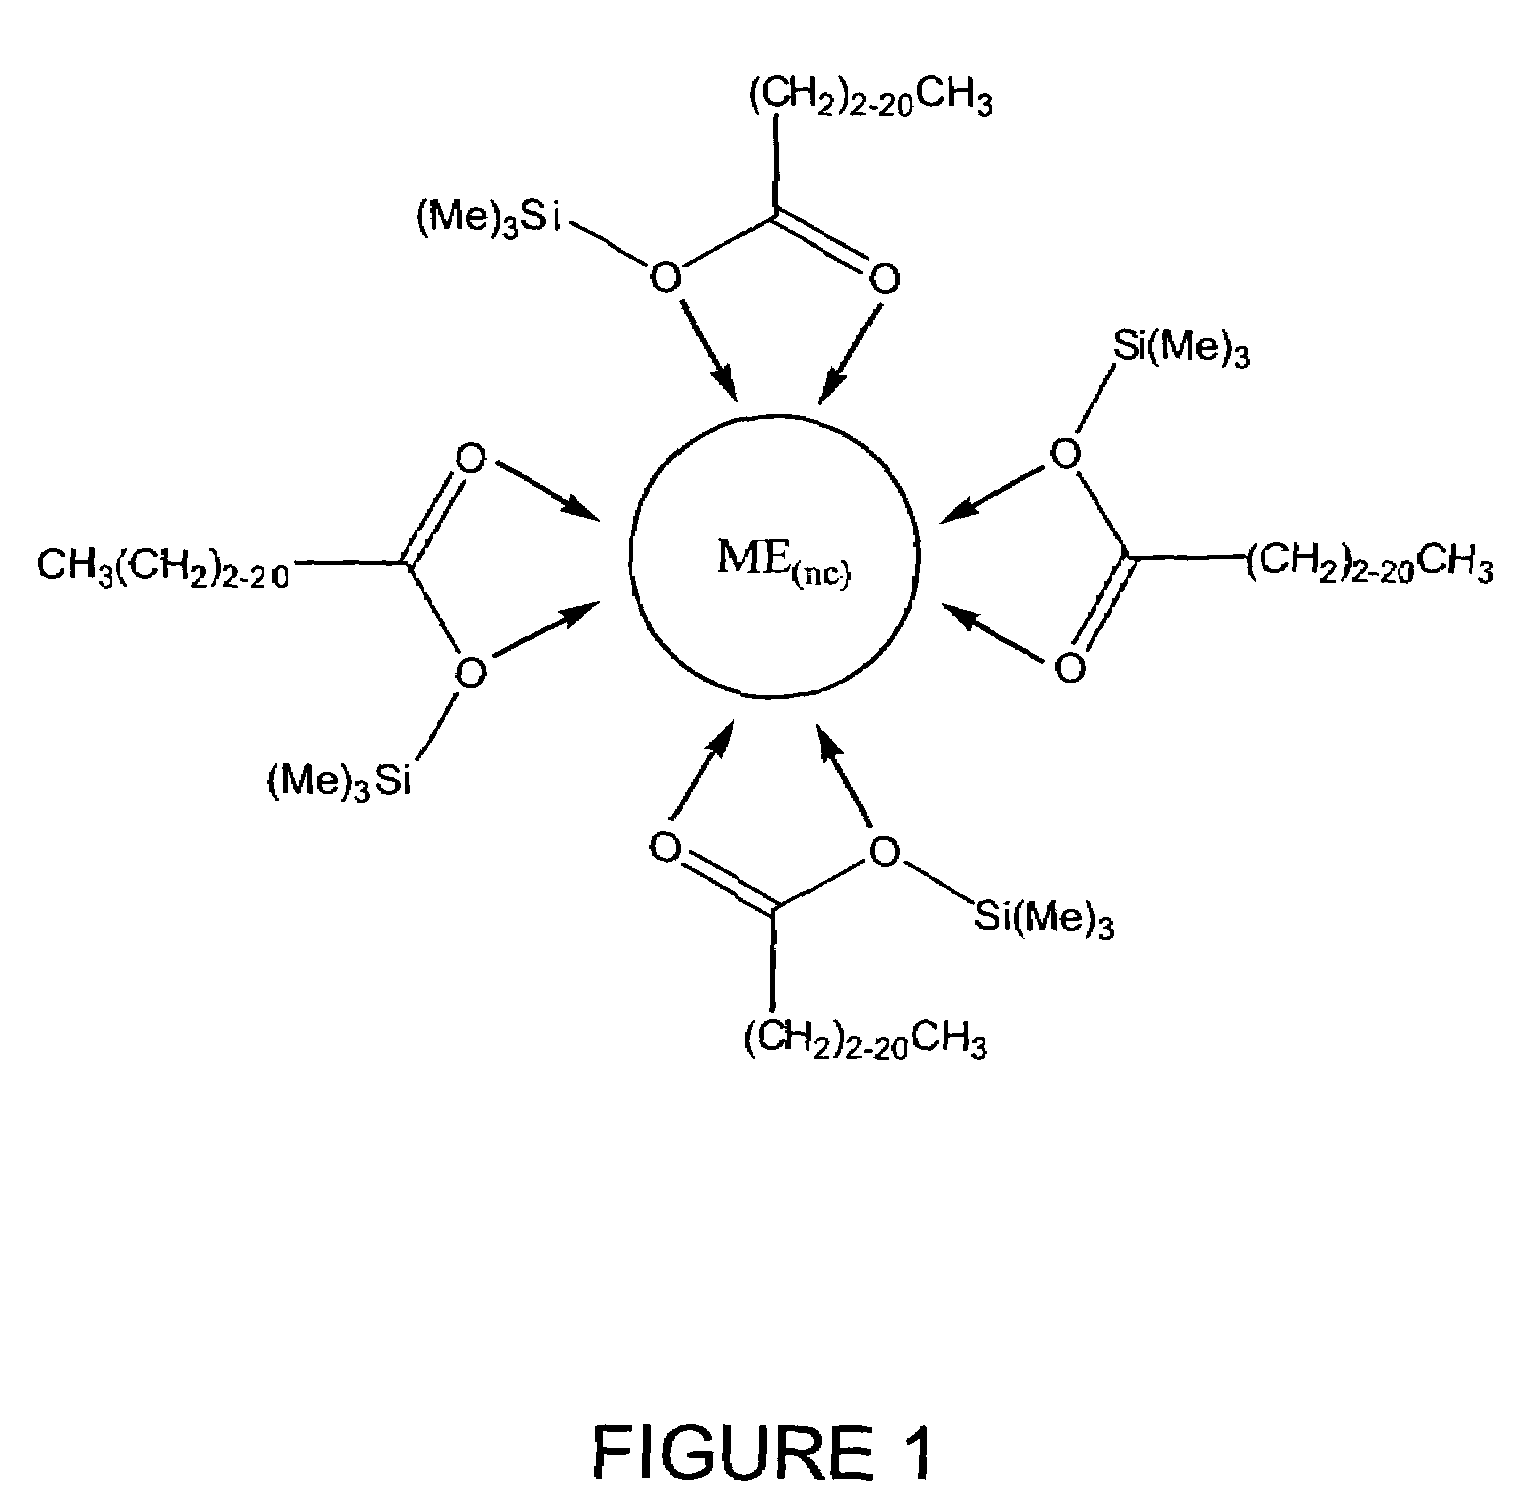 Process for producing semiconductor nanocrystal cores, core-shell, core-buffer-shell, and multiple layer systems in a non-coordinating solvent utilizing in situ surfactant generation